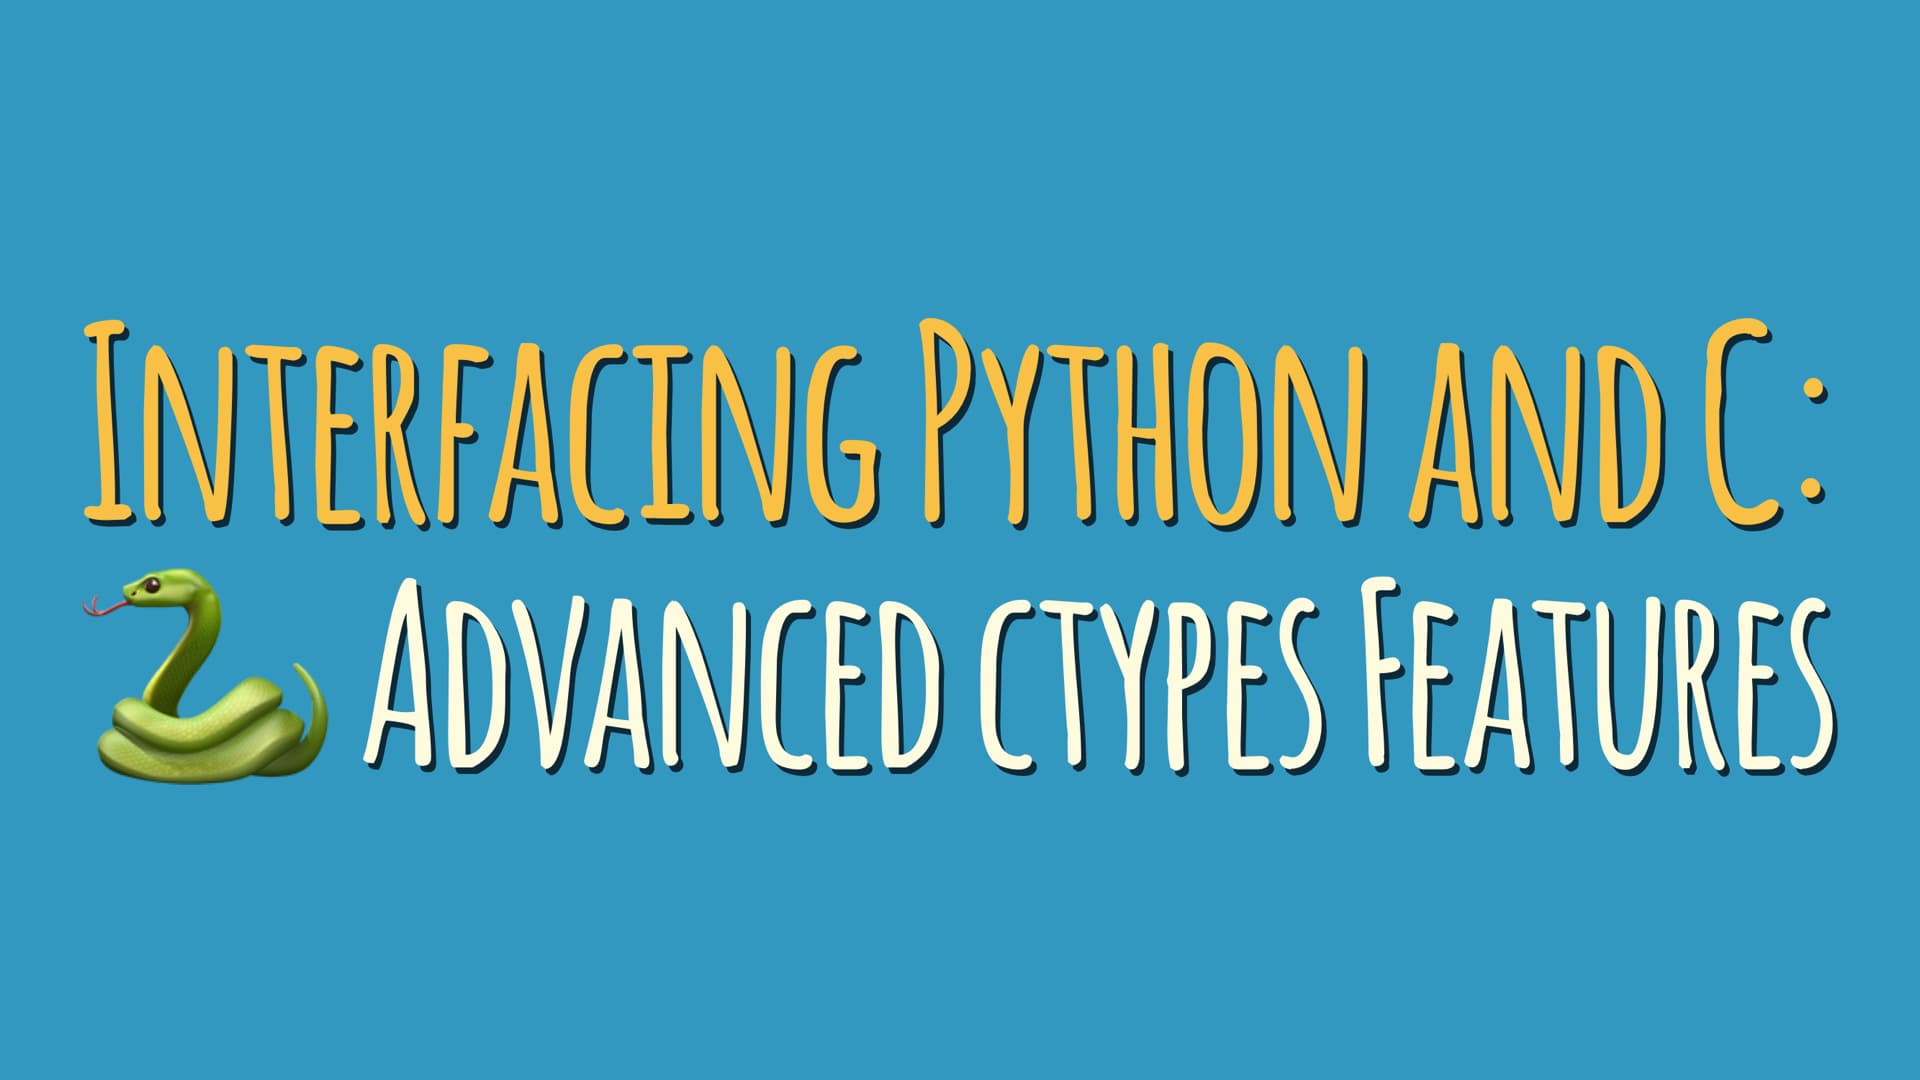 Interfacing Python and C: Advanced “ctypes” Features